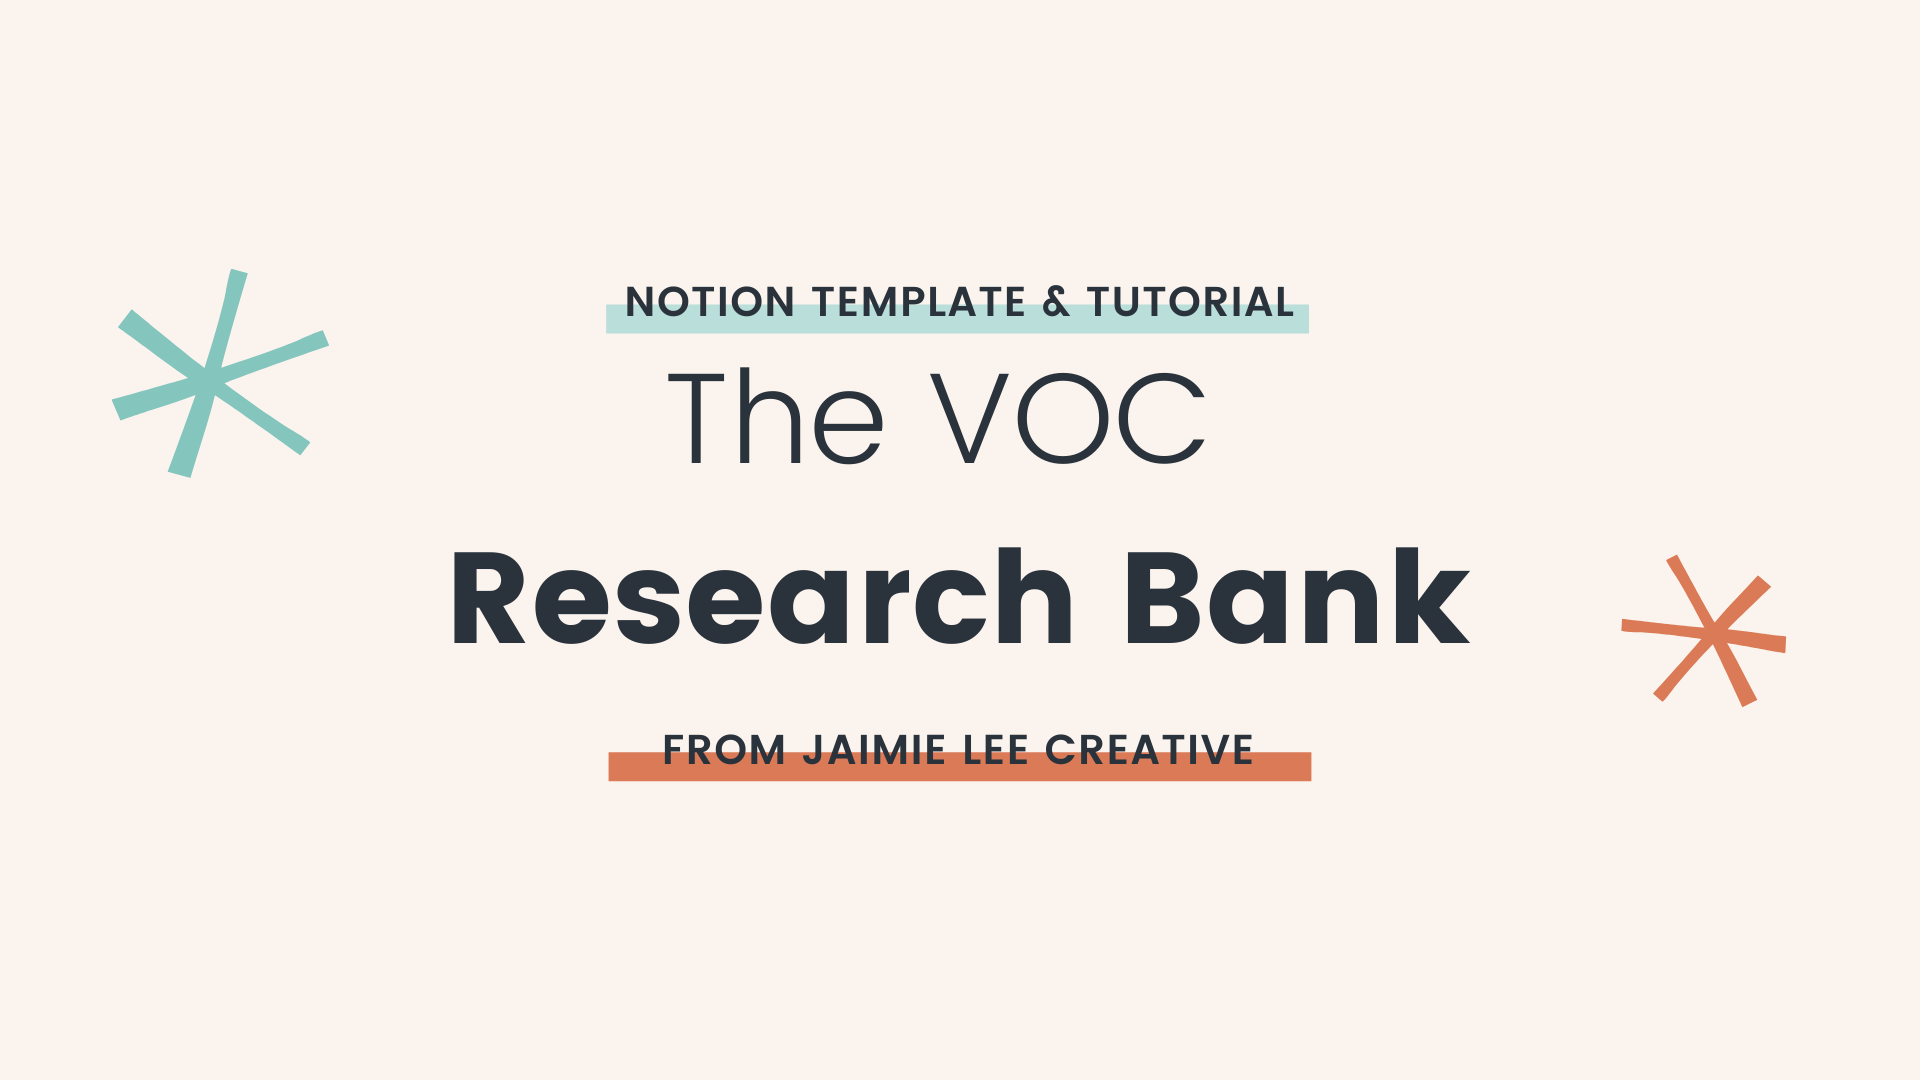 https://storage.googleapis.com/tally-block-assets/ae57d1ad-691f-4c9d-b358-0ae42802c907/The-VOC-Research-Bank-Notion-Template-and-Tutorial.png